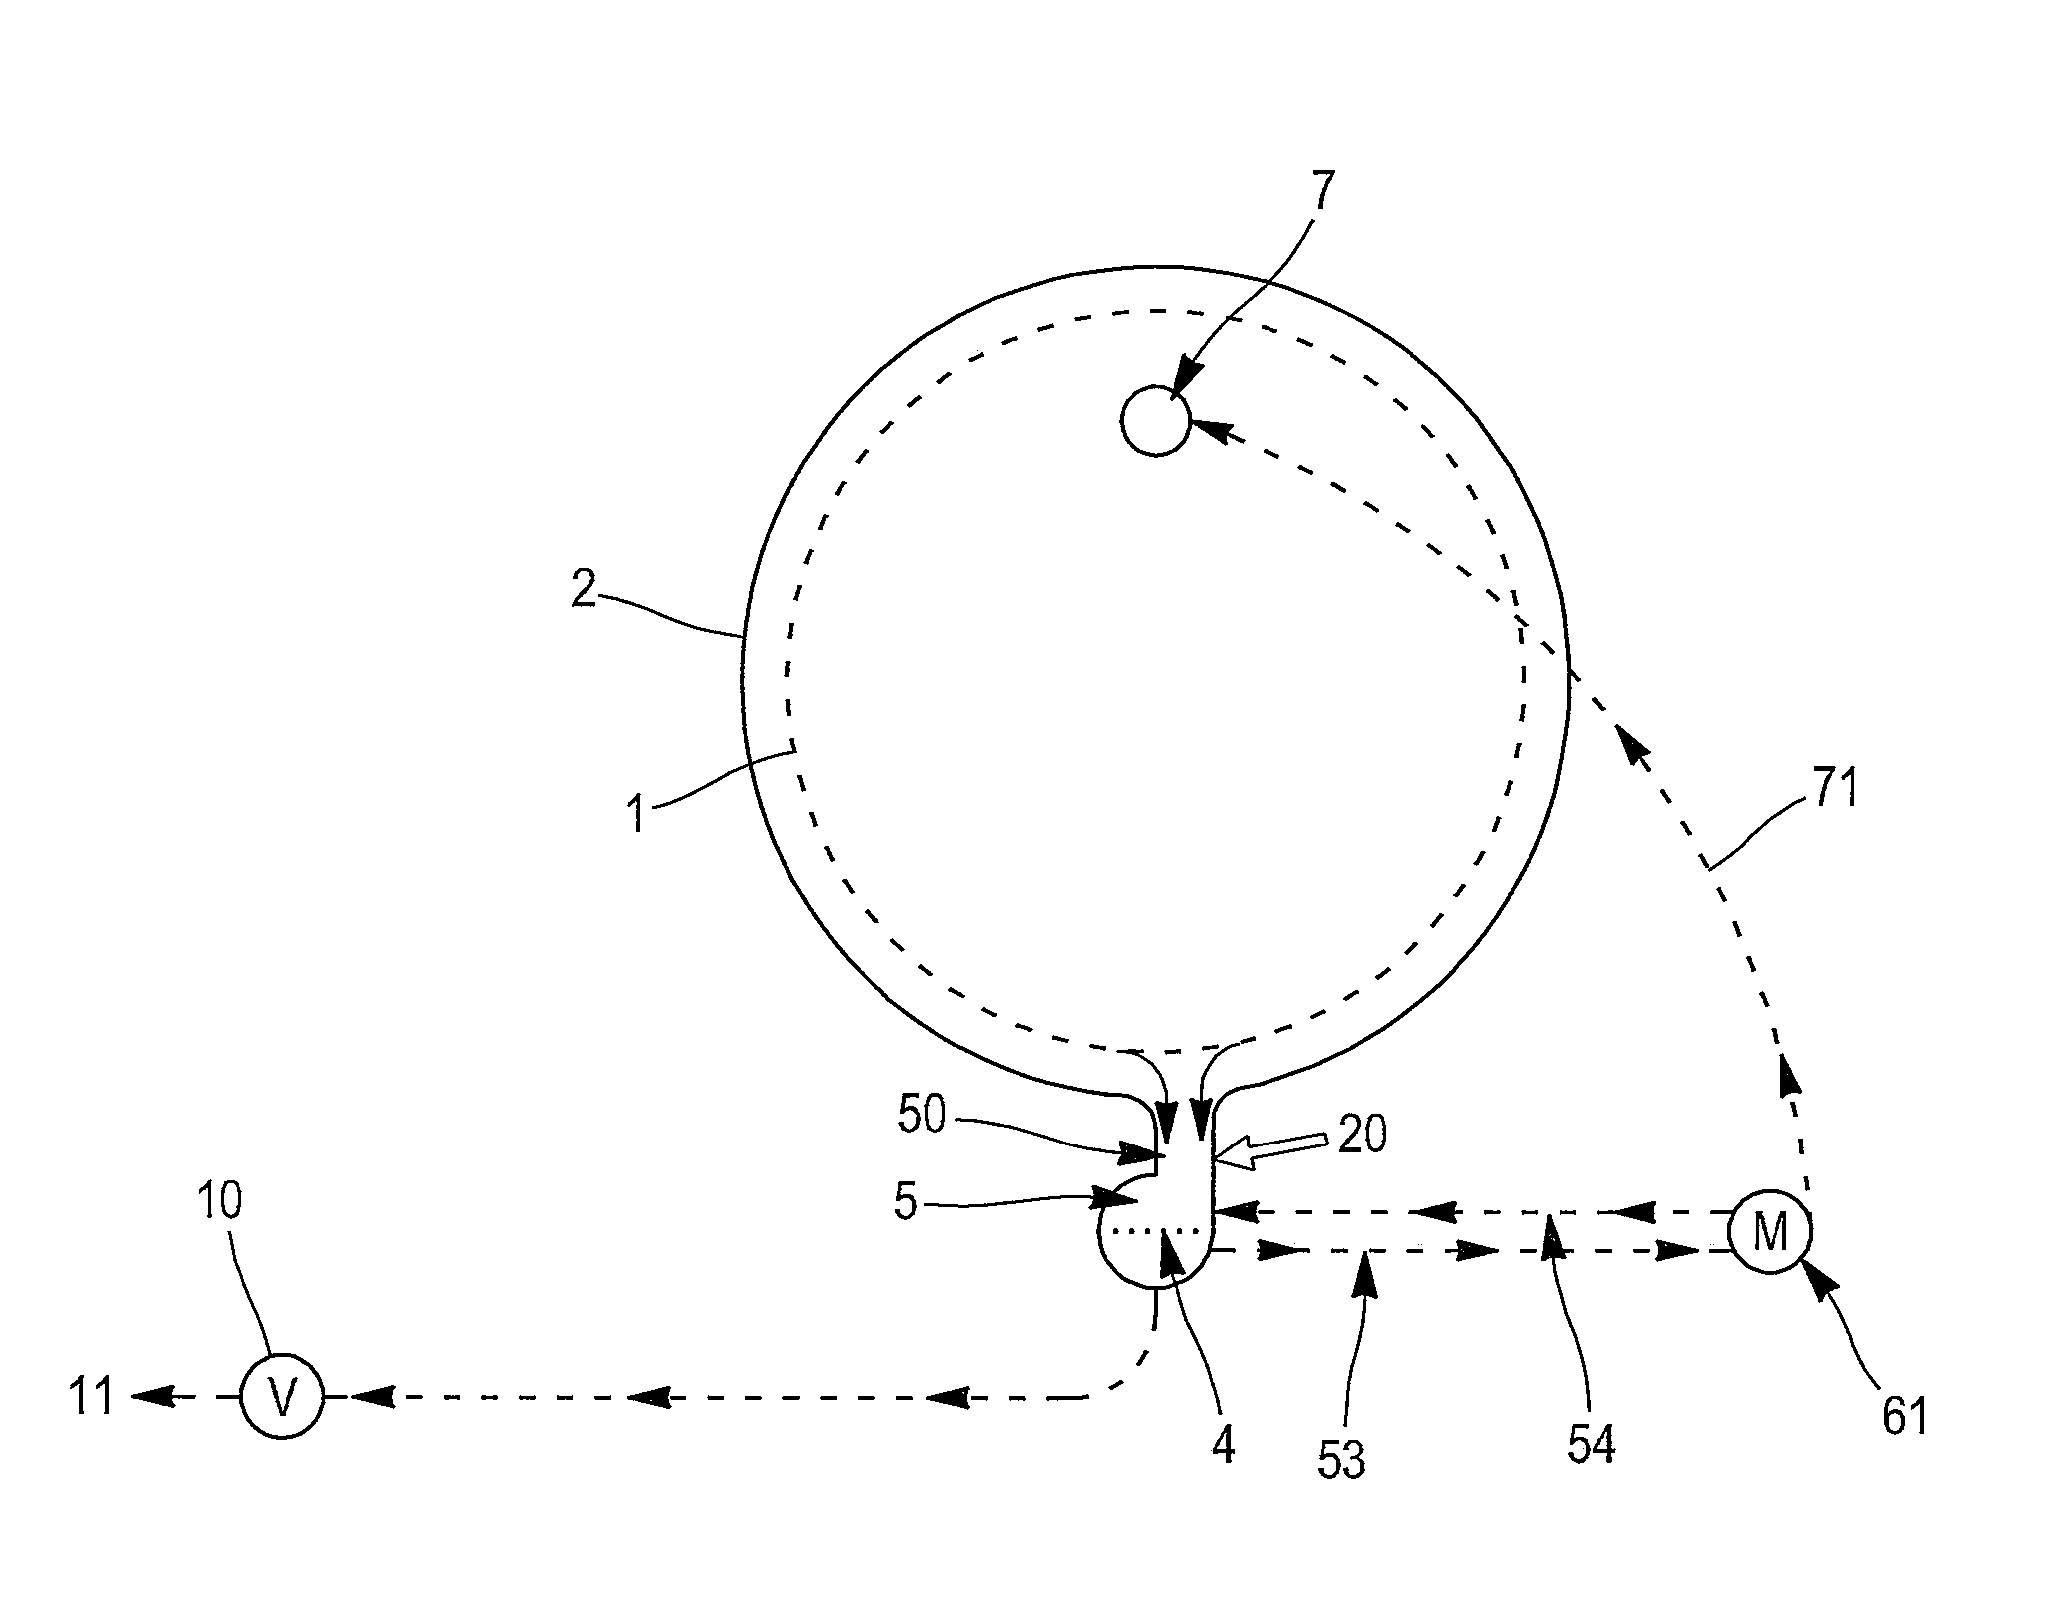 Method and Apparatus for Cleaning Delicate Textiles